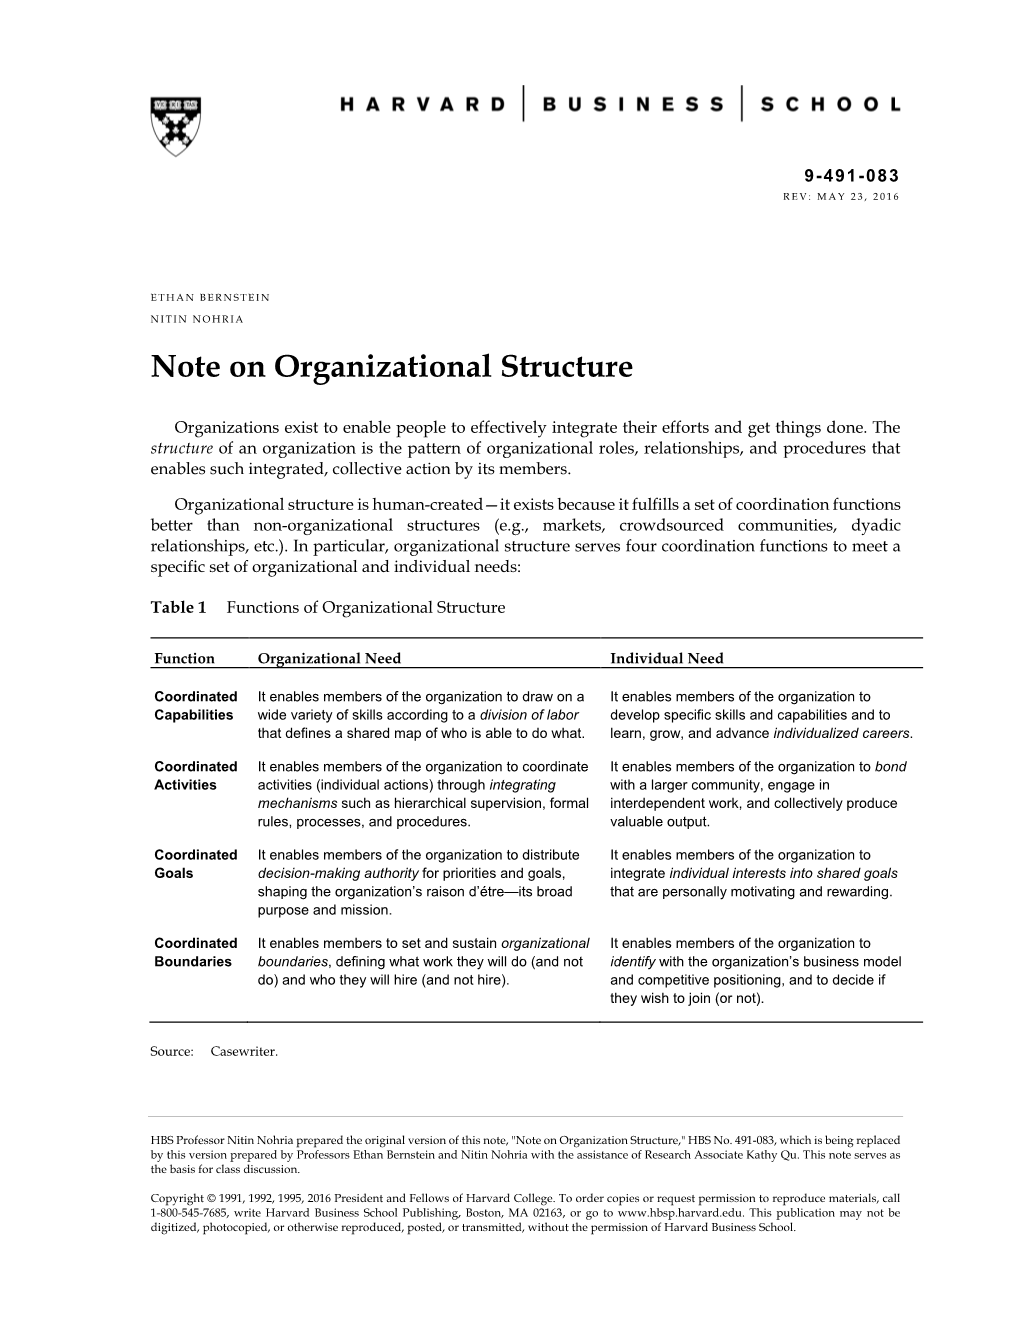 Note on Organizational Structure